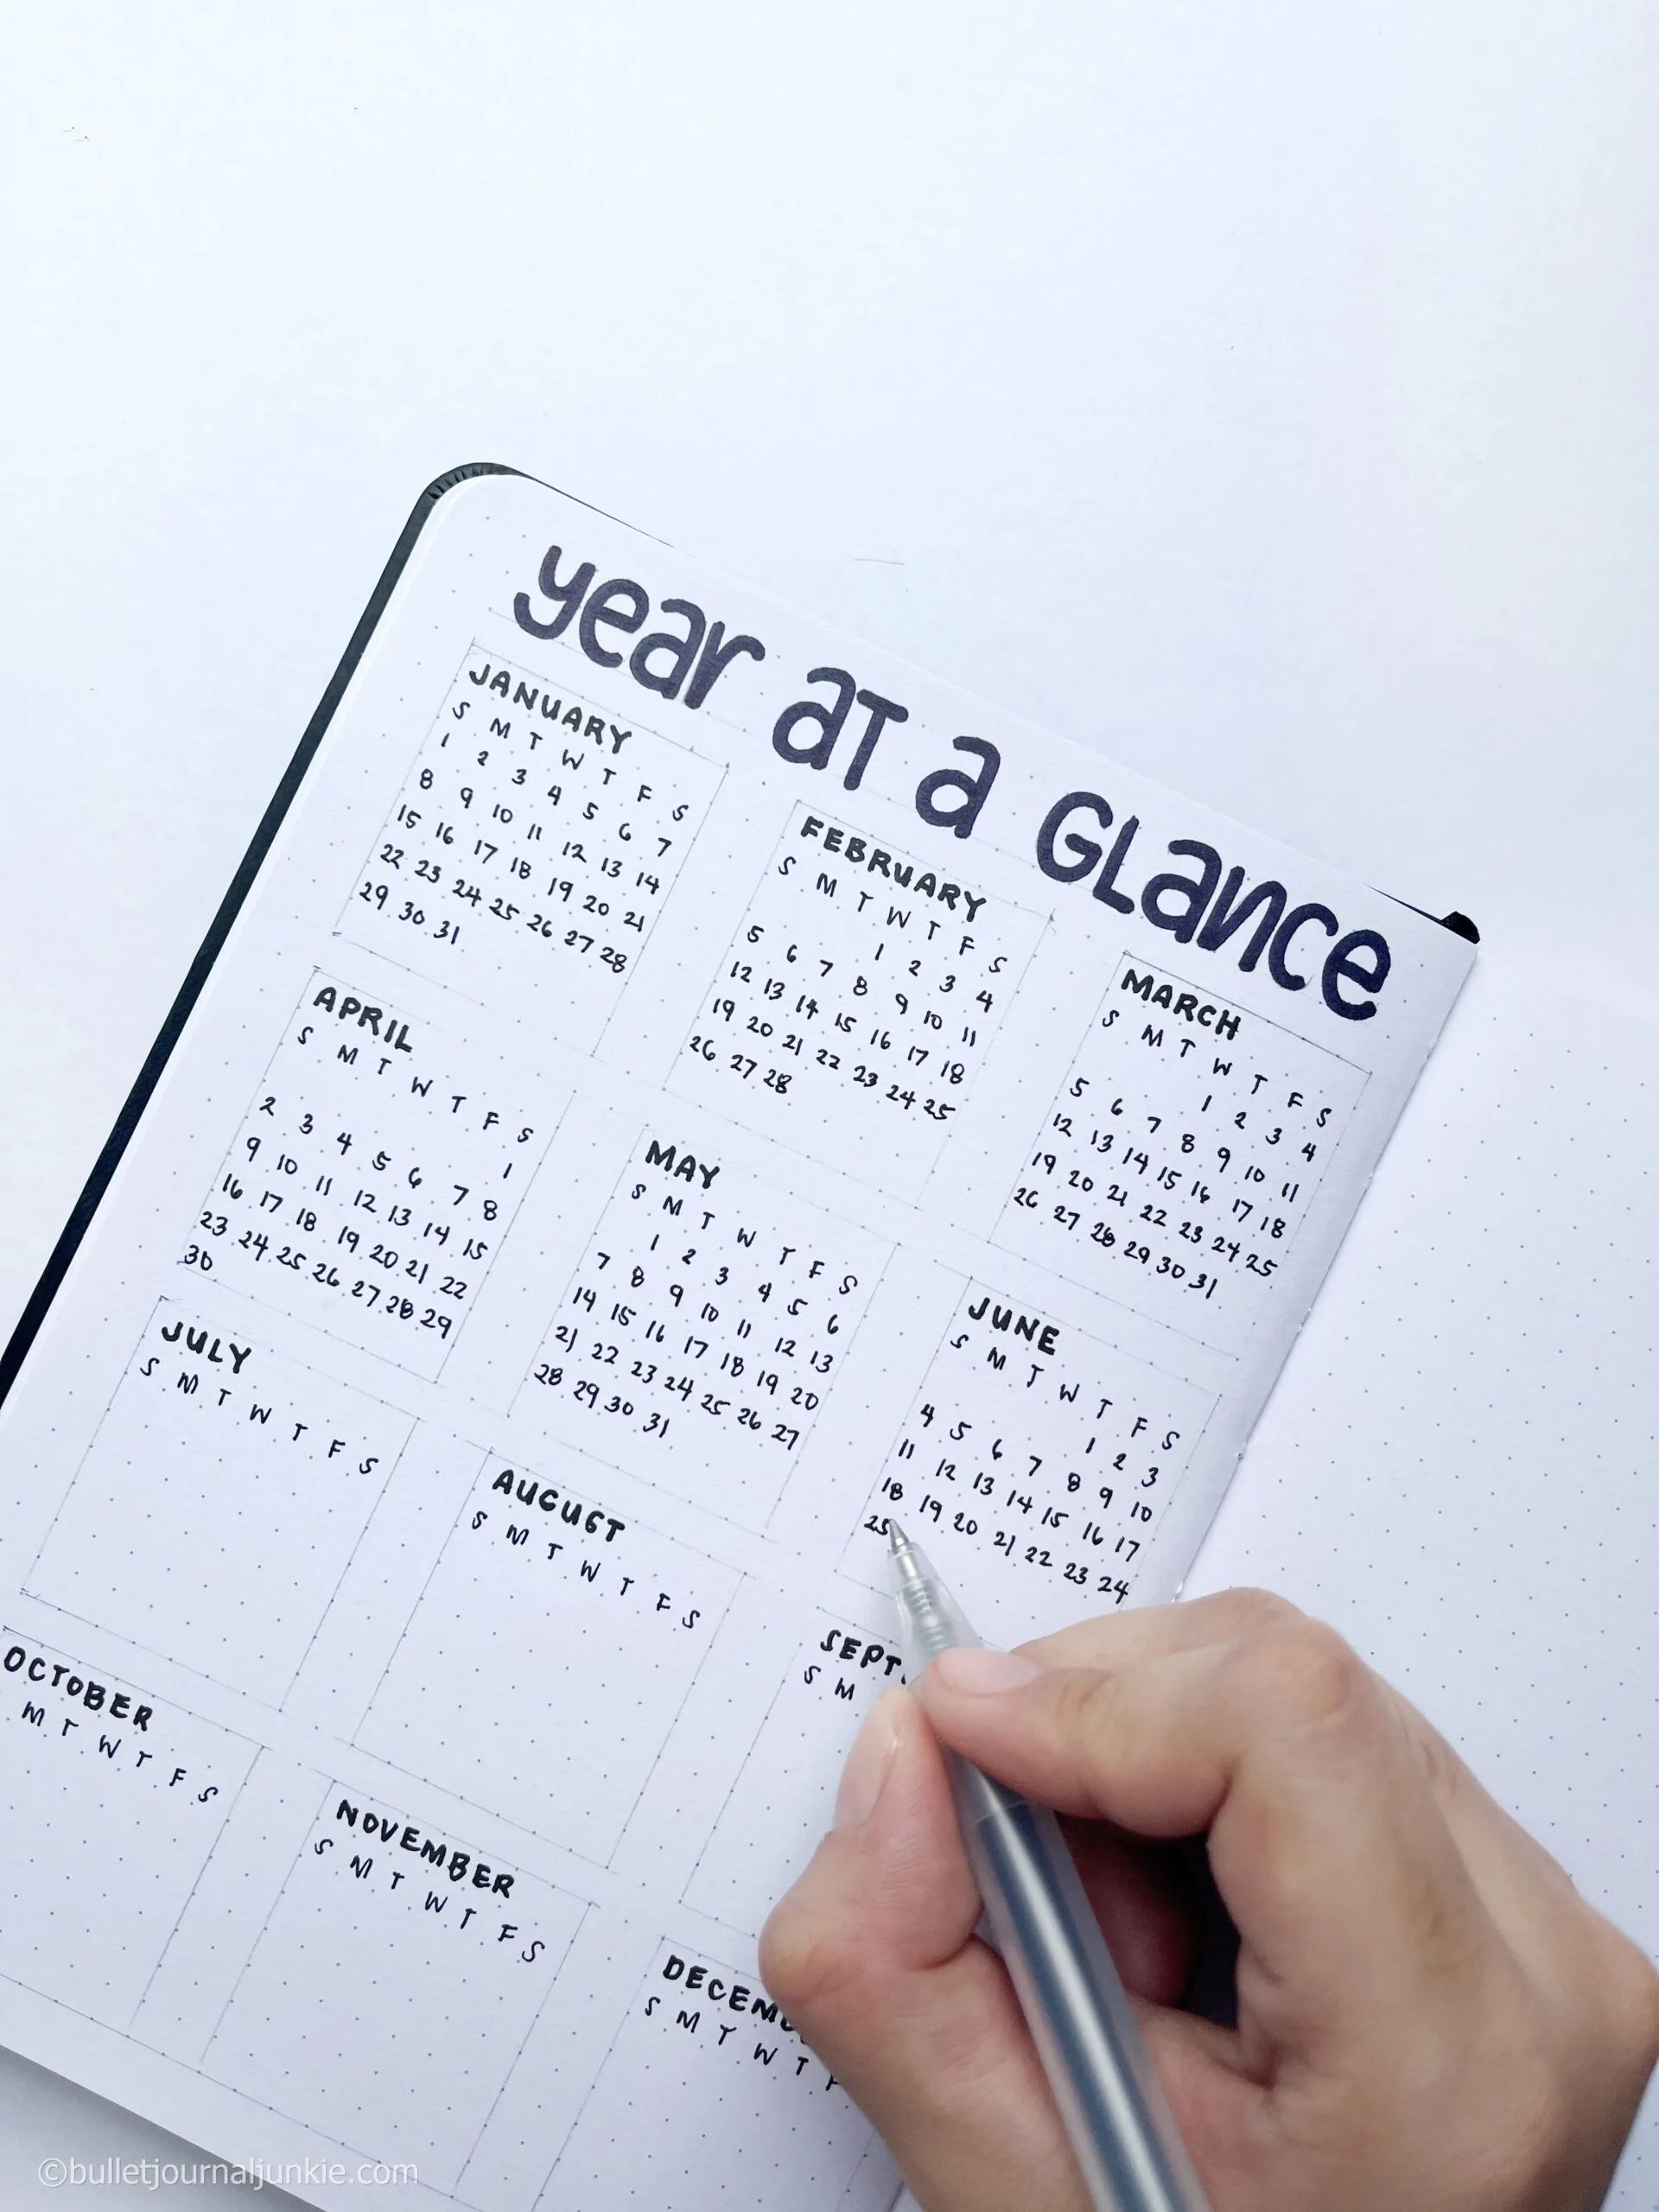 Writing the days of the month with a pen in the year at a glance bullet journal layout.